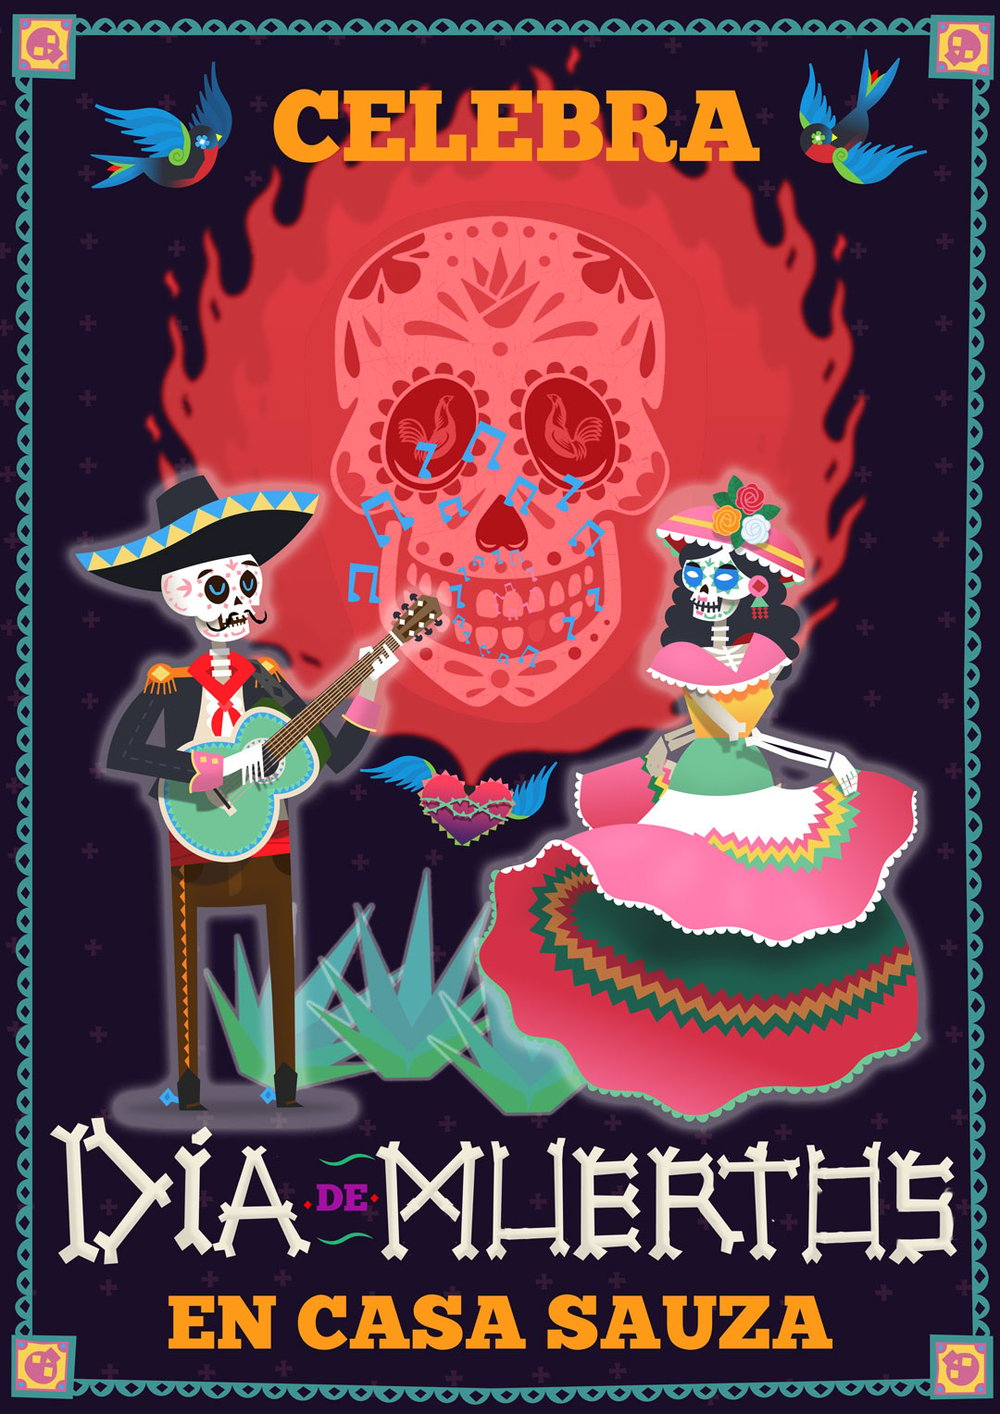 Day of the death at Mexico